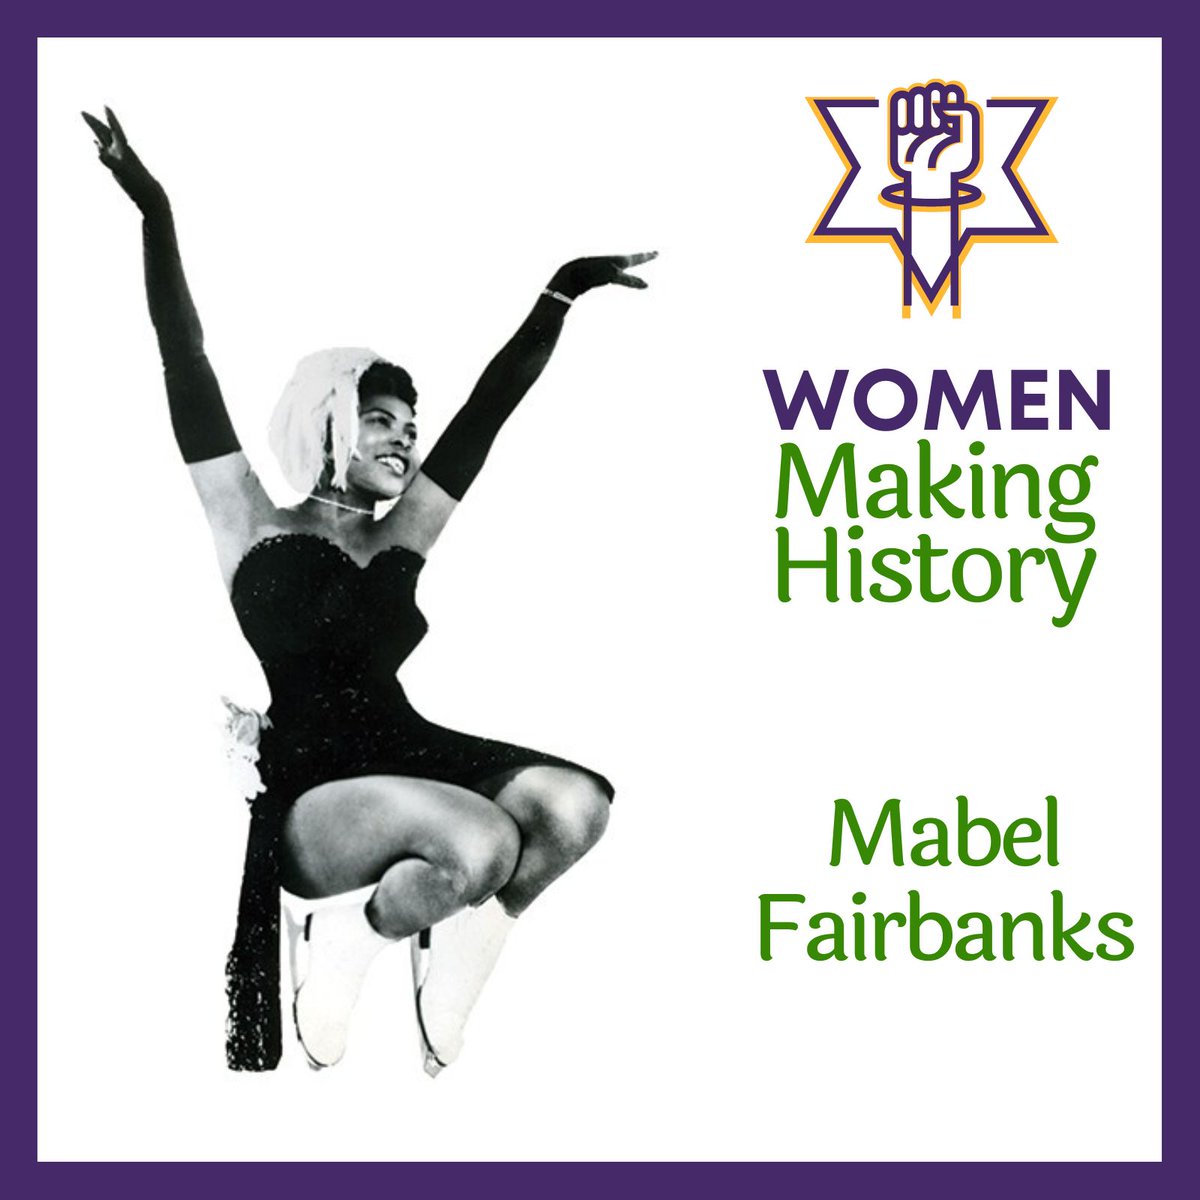 In honour of Black History Month this week's #WomenMakingHistory episode features Mabel Fairbanks - the first African American inducted into the US Figure Skating Hall of Fame. You can listen here: bit.ly/3DLPc23

#BlackHistoryMonth